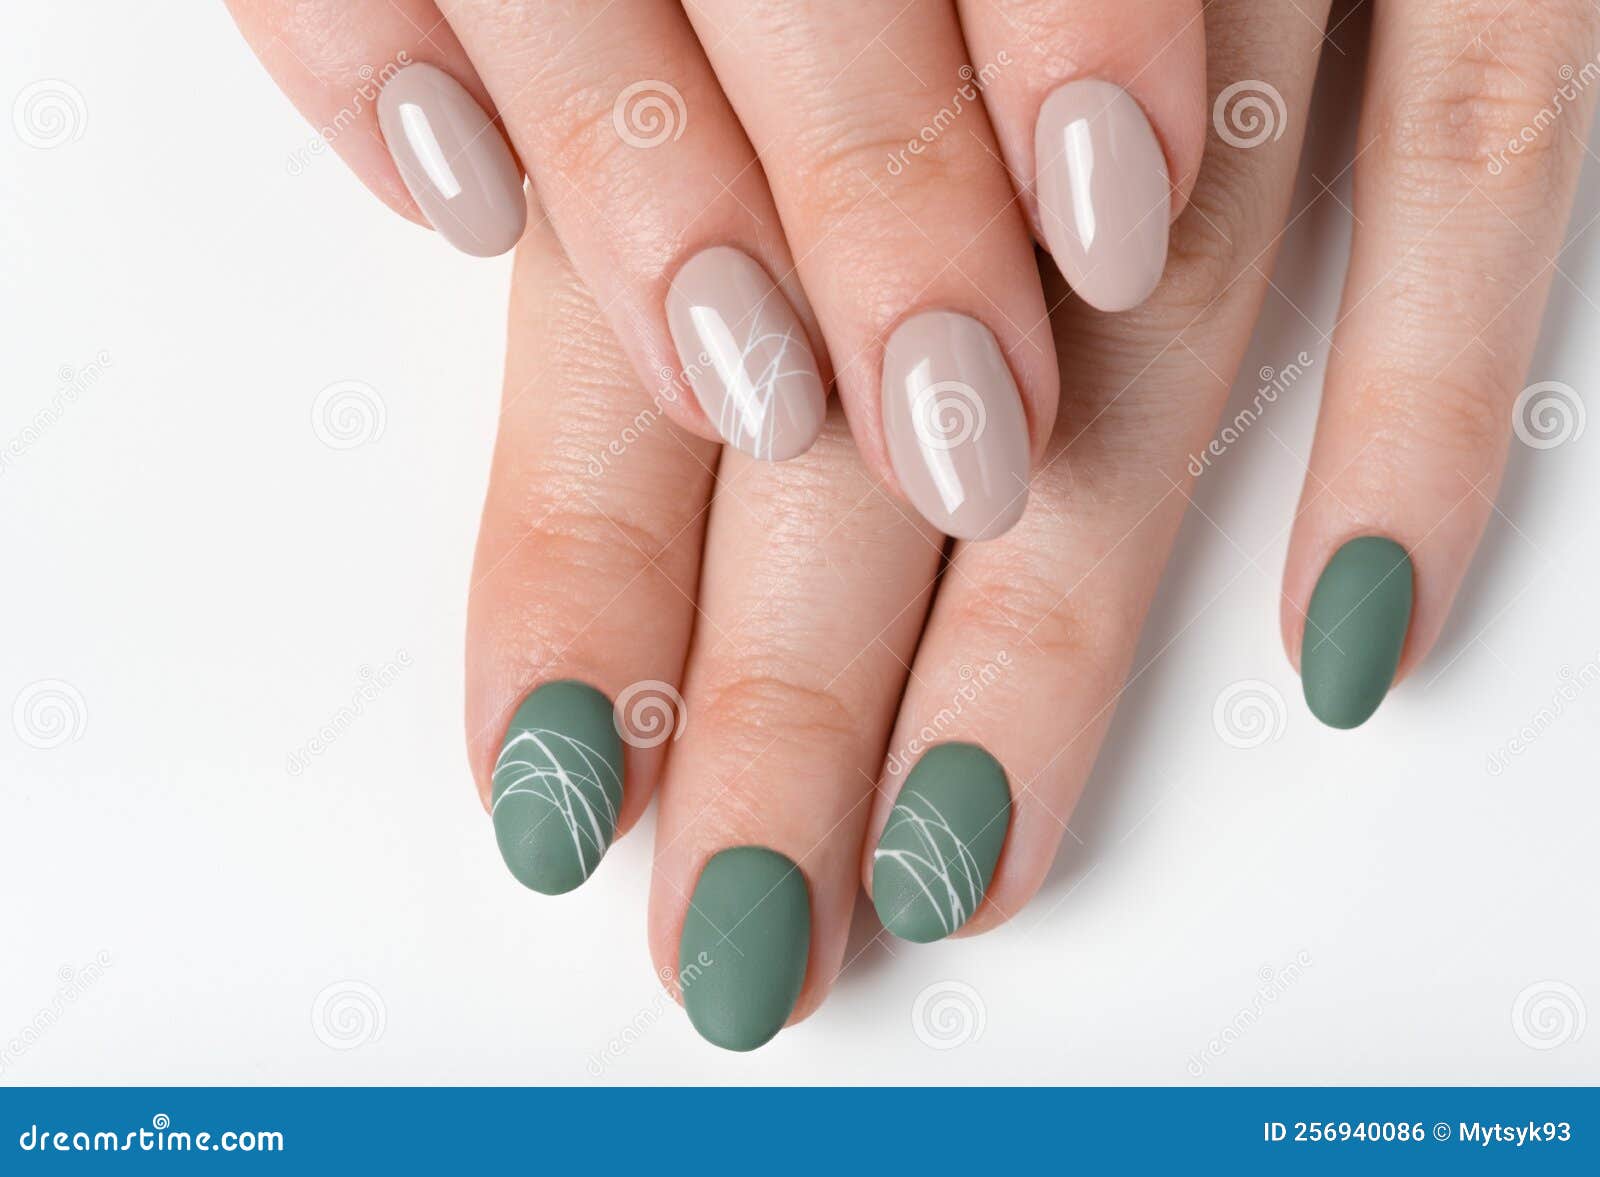 What is important to know about matte nails?